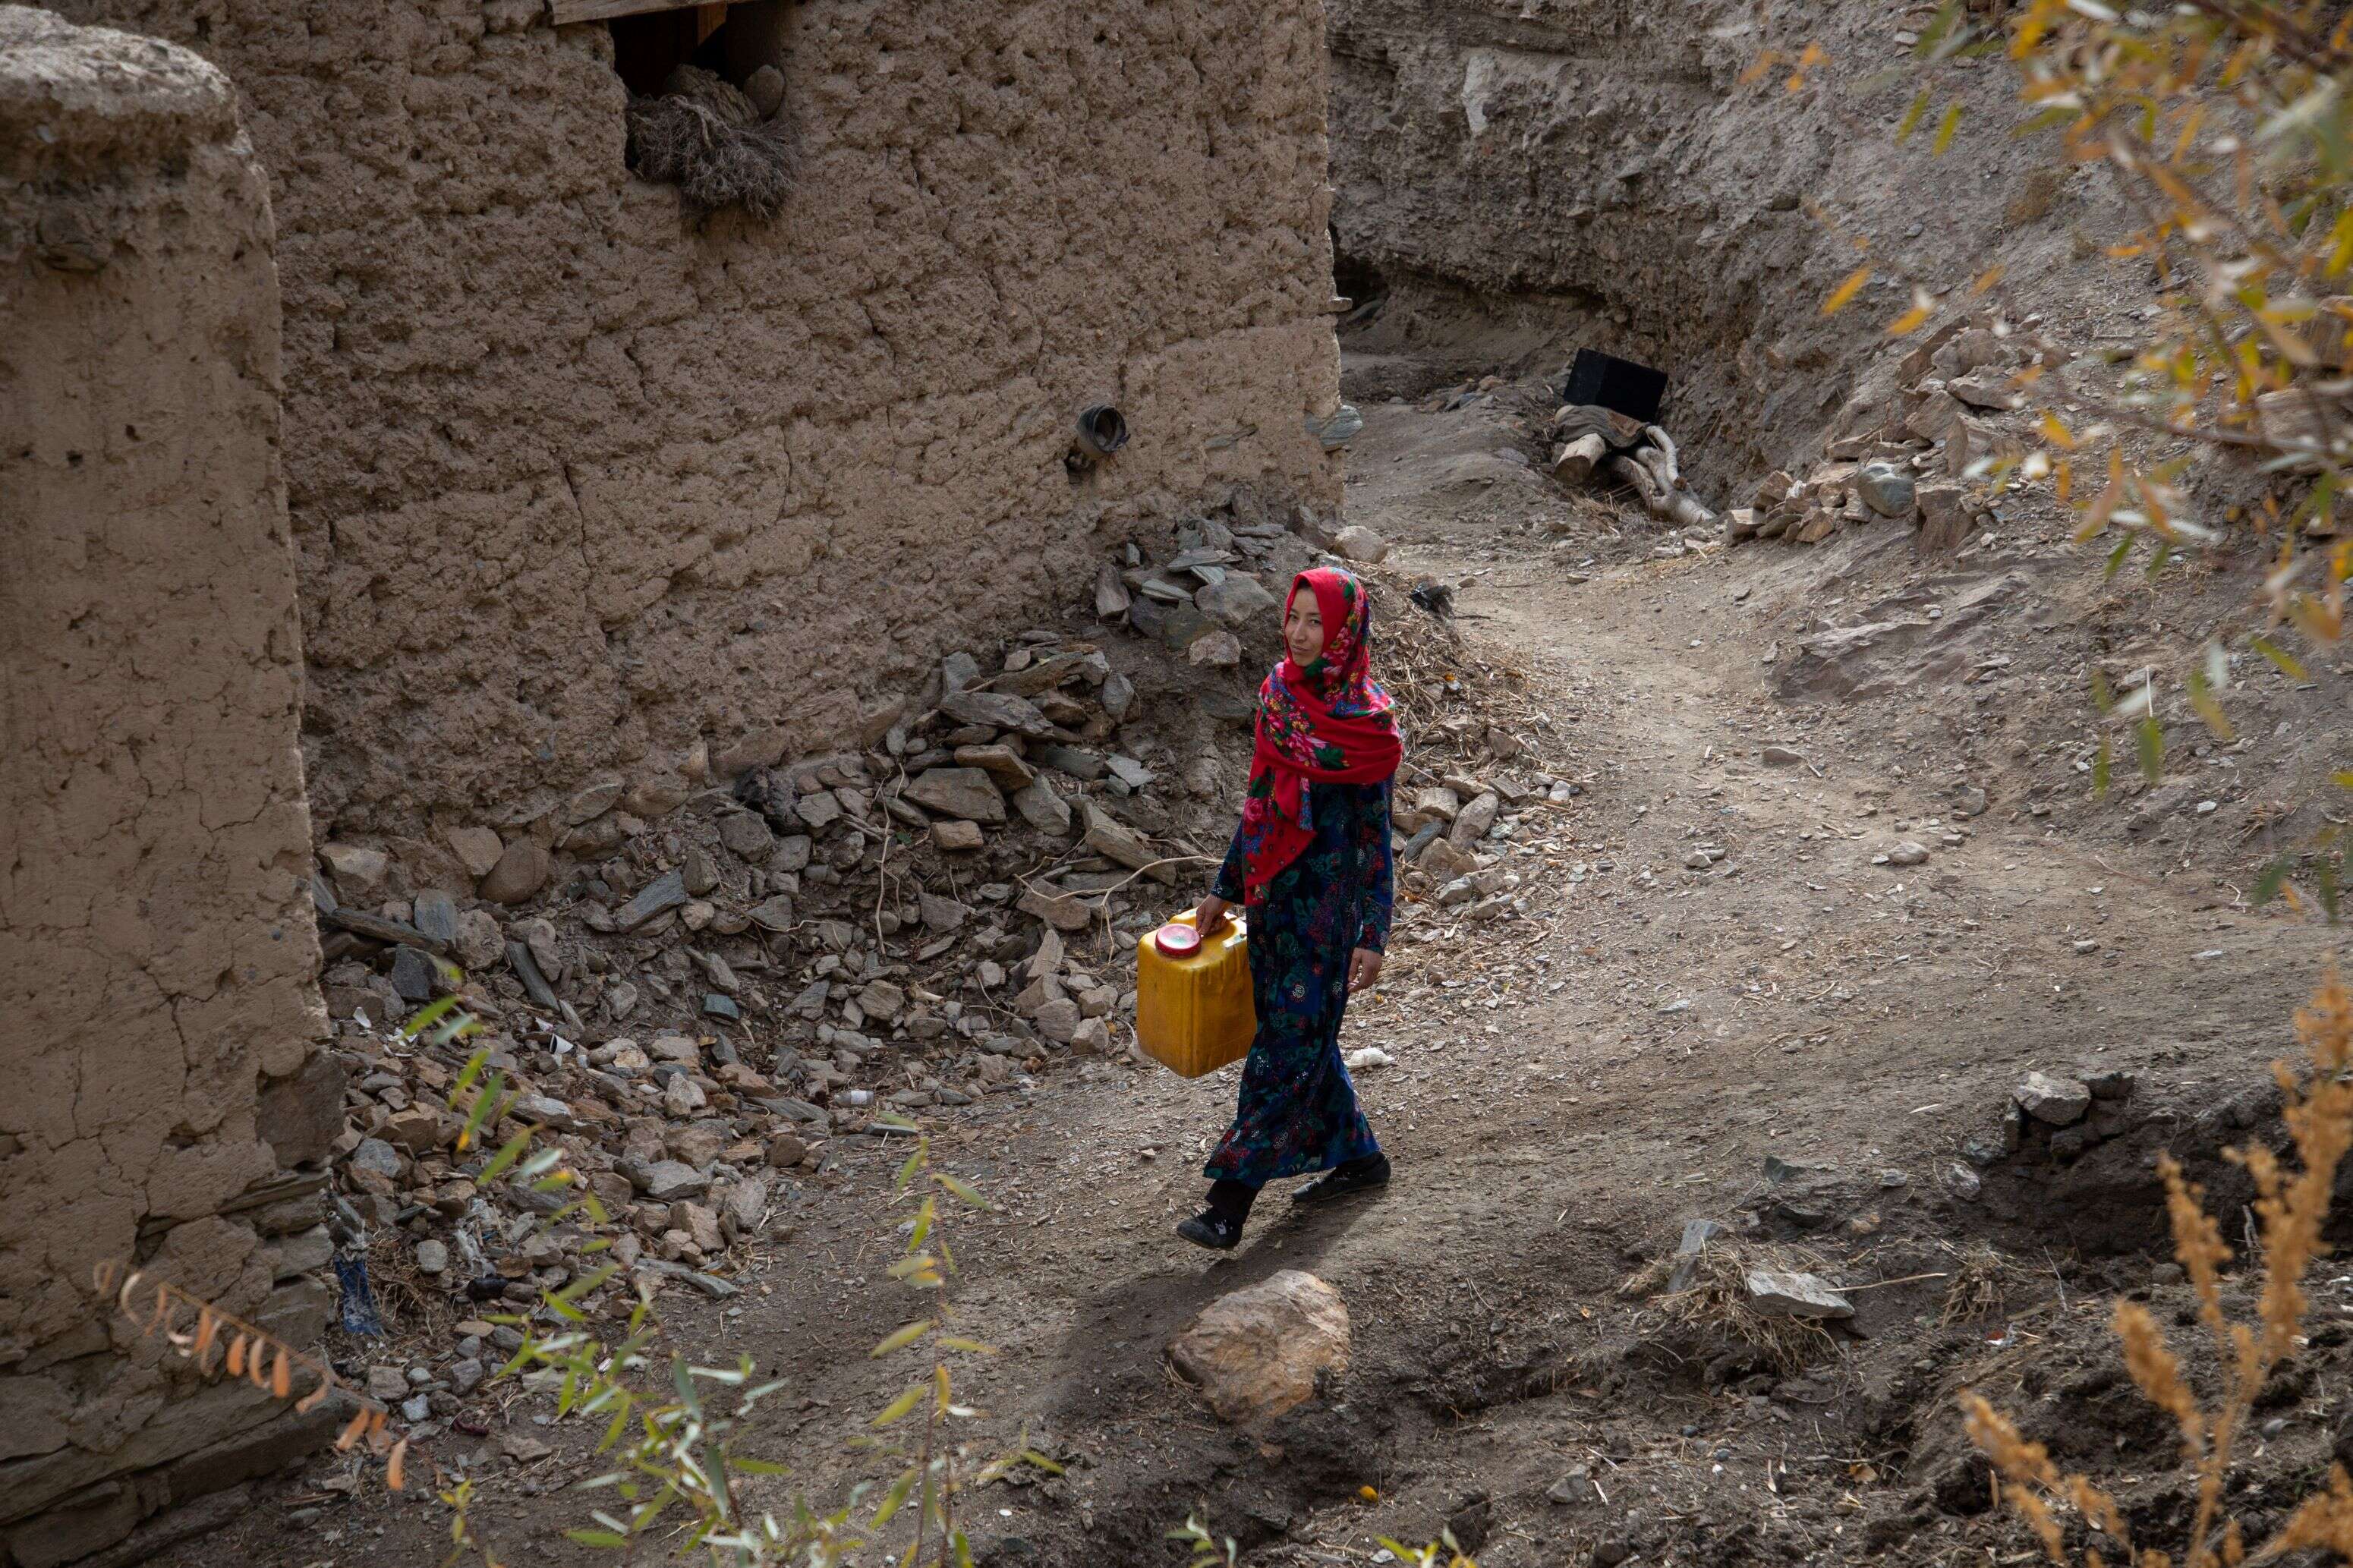 Rozama, 27, walks towards the river to collect water in Sabzaab Bala village, Bamiyan province, Afghanistan.